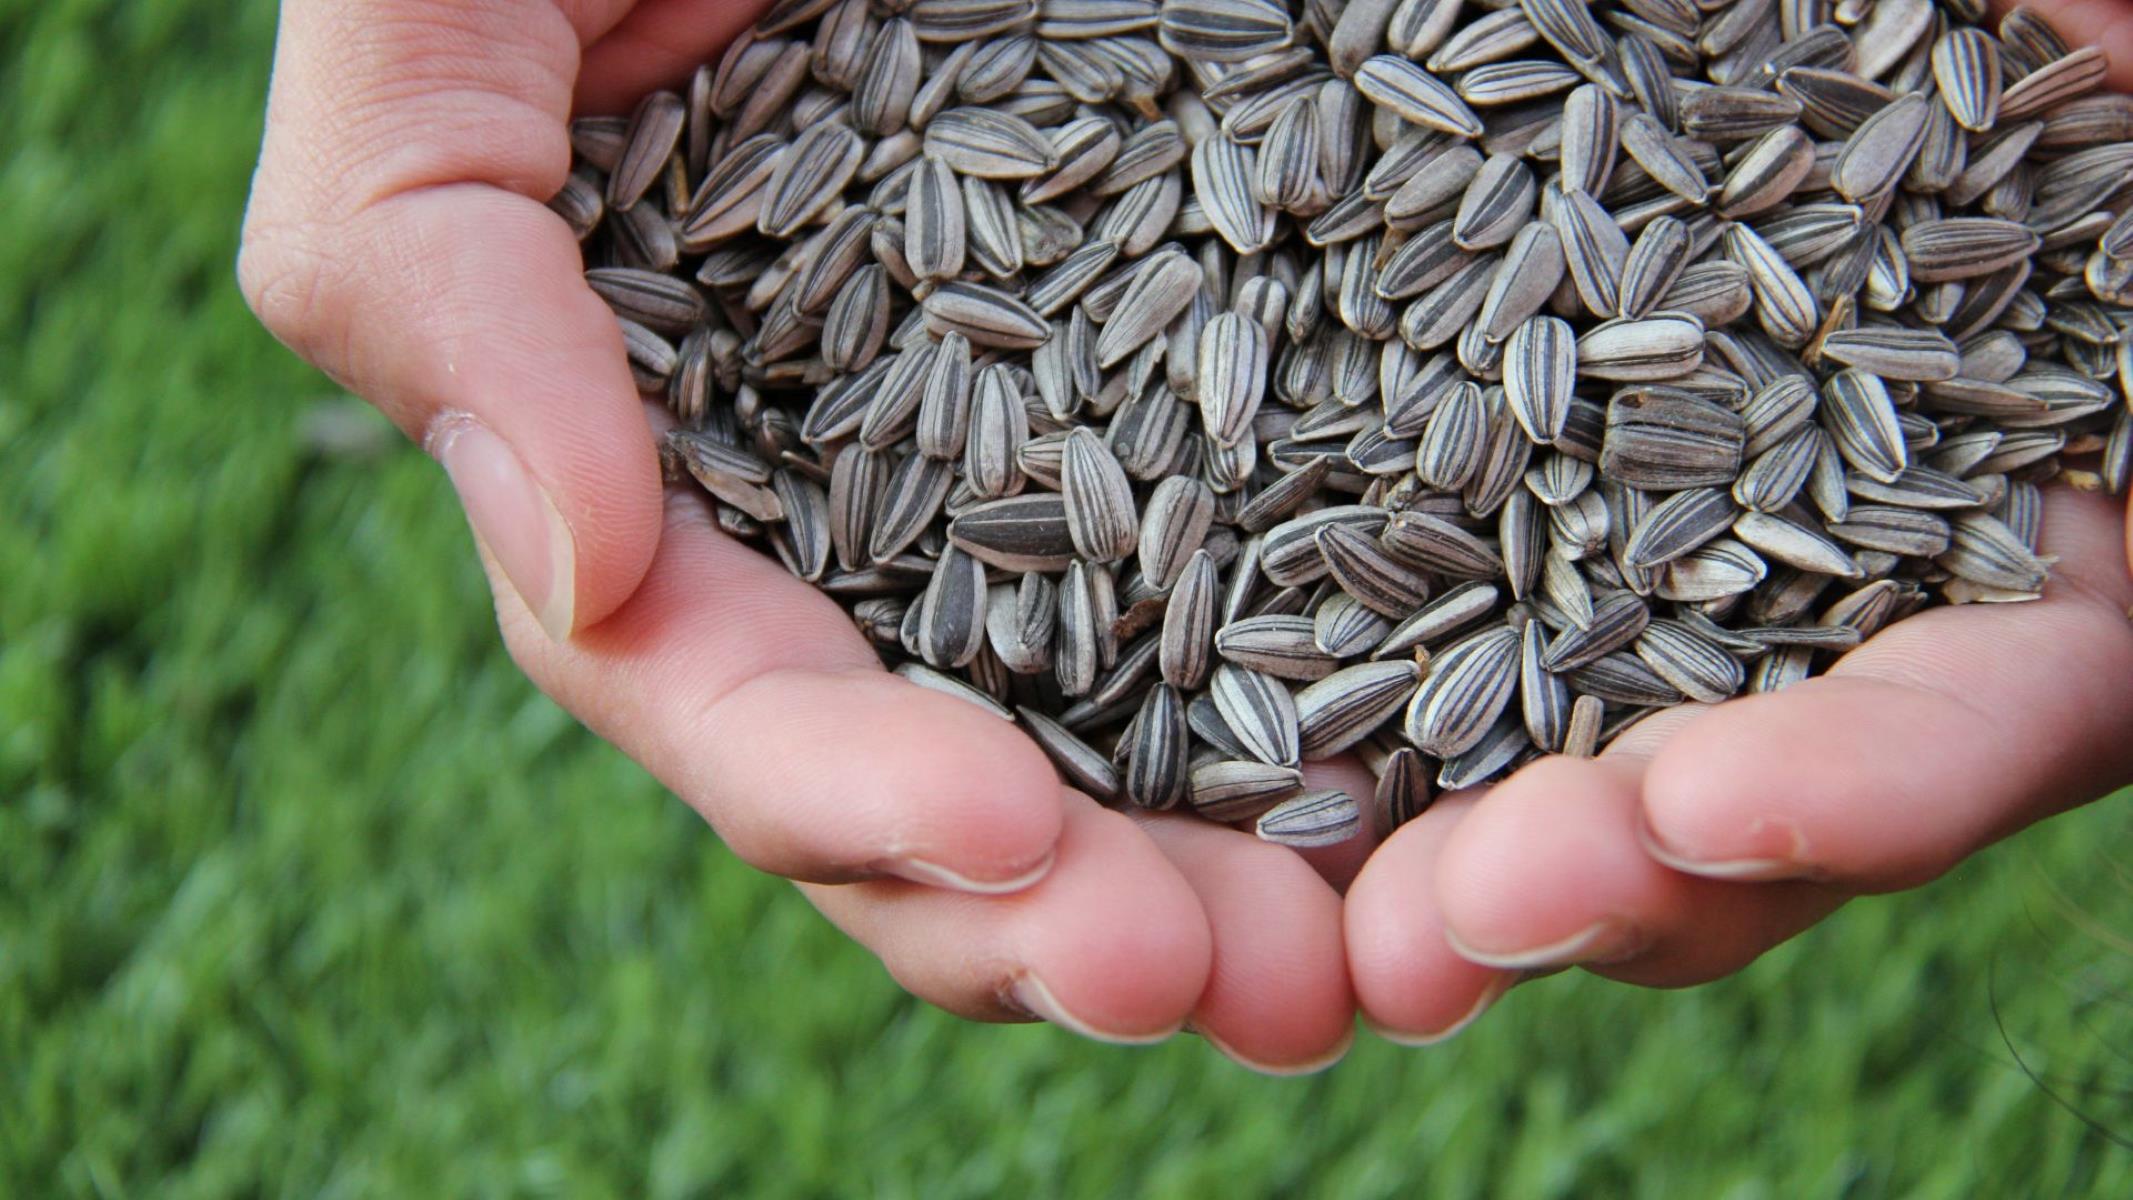 Why Are Sunflower Seeds Bad For You